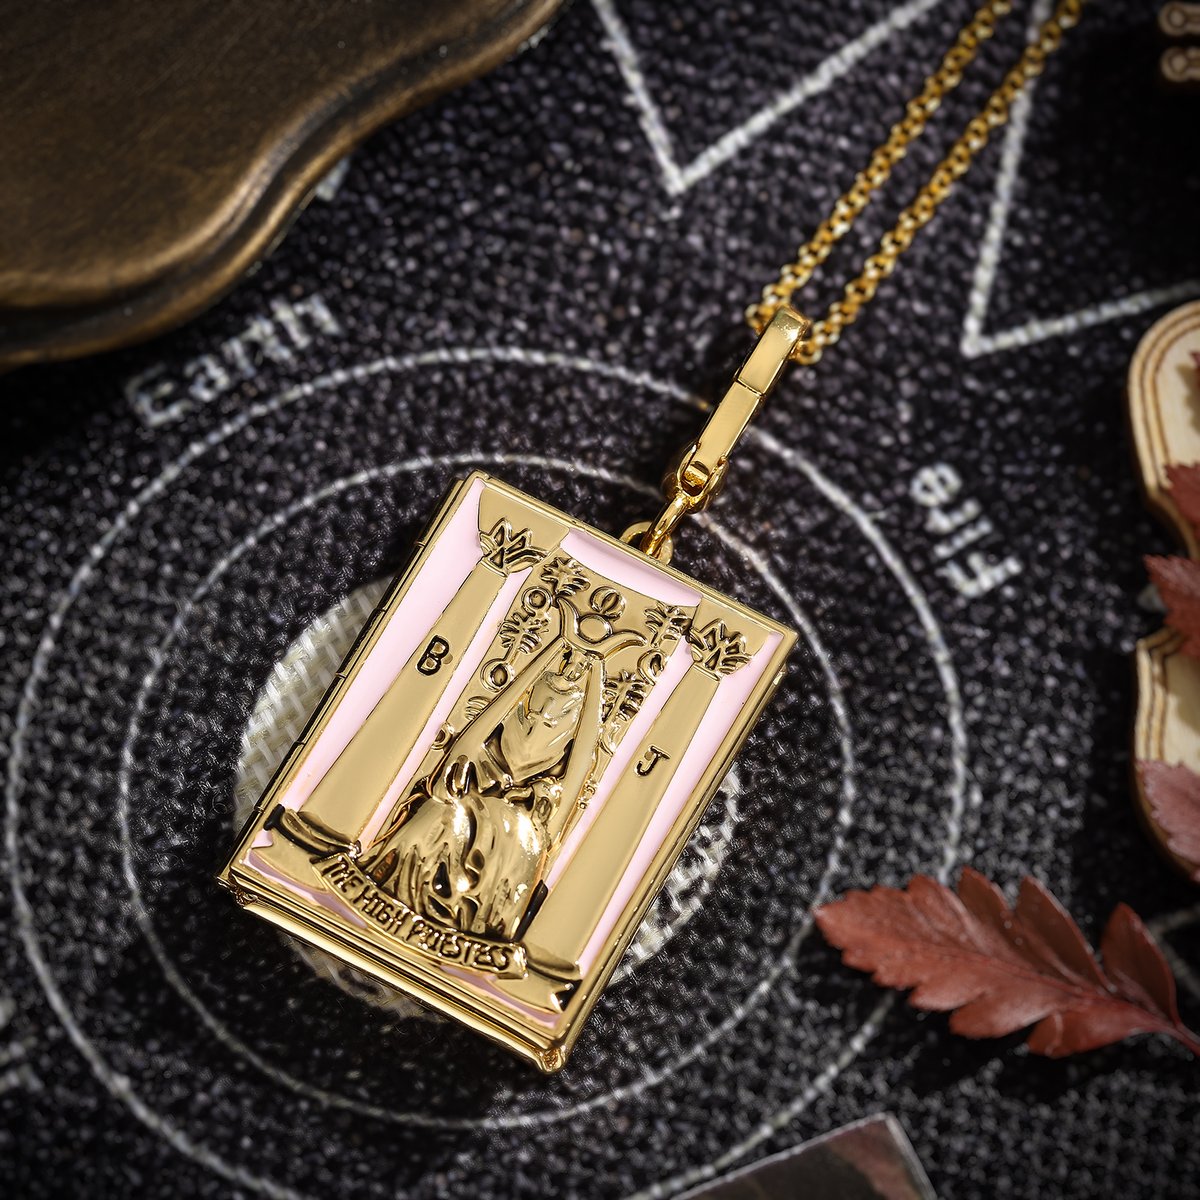 High Priestess is a card of mystery, stillness and passivity.👉 This card suggests that it is time to retreat and reflect upon the situation and trust your inner instincts to guide you through it.

#selenichastjewel #selenichast #locketnecklace #tarotcards #tarotnecklace